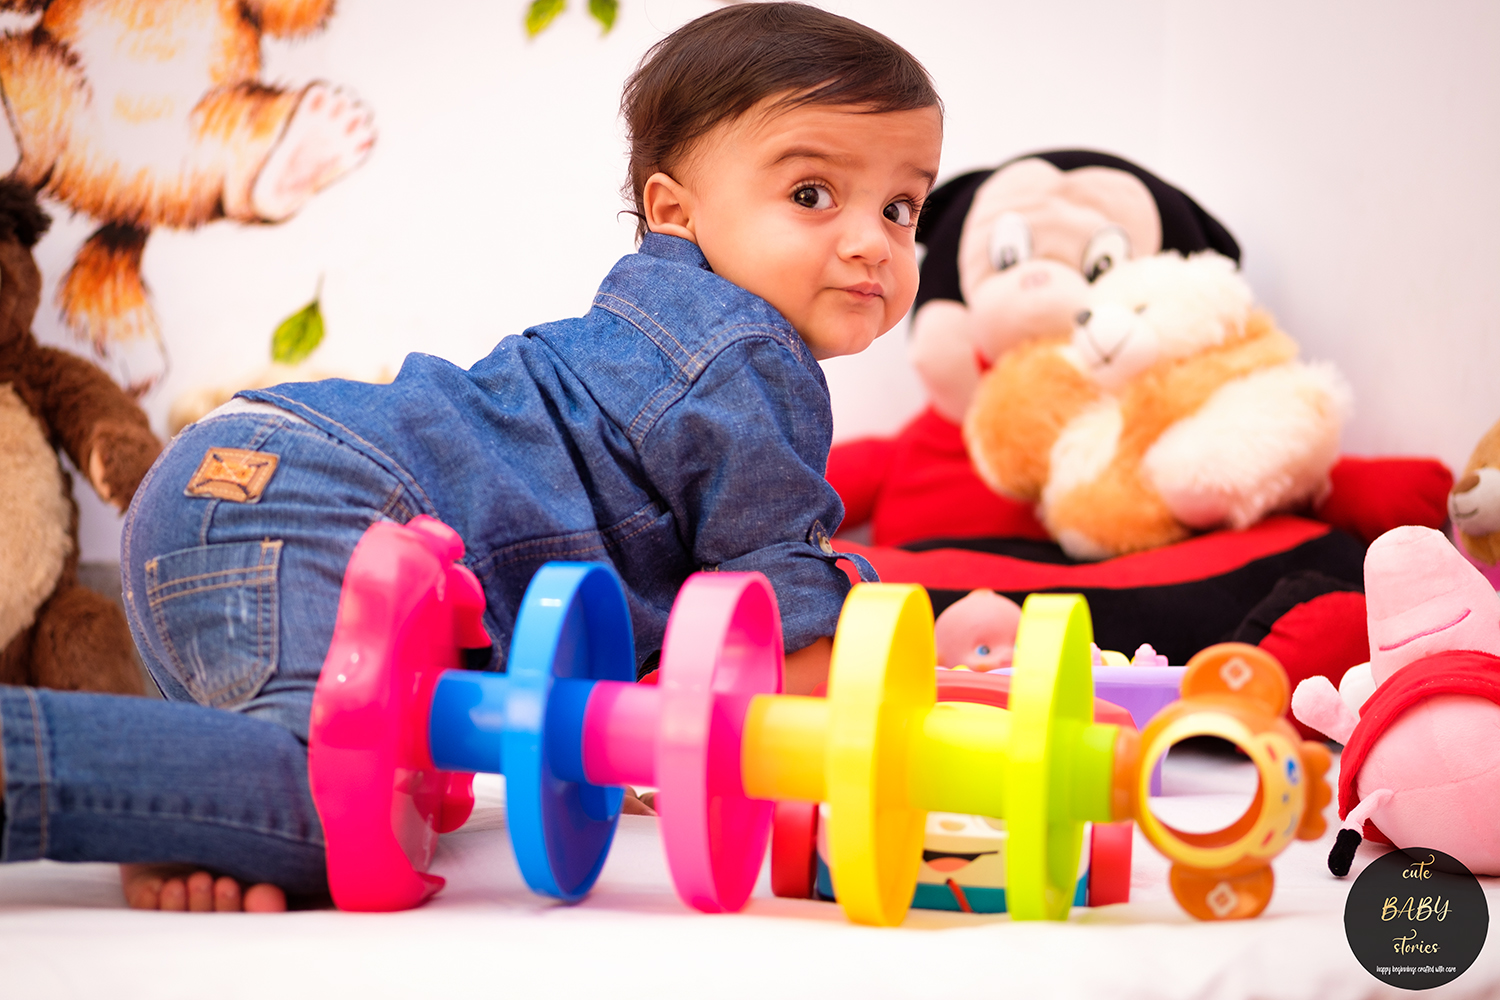 Baby Photographers in Durgapur, Baby Photographers in Kolkata, Baby Photographers in Asansol, Baby Photography, New Born Photography, Pre Birthday Photography, One Year Photography